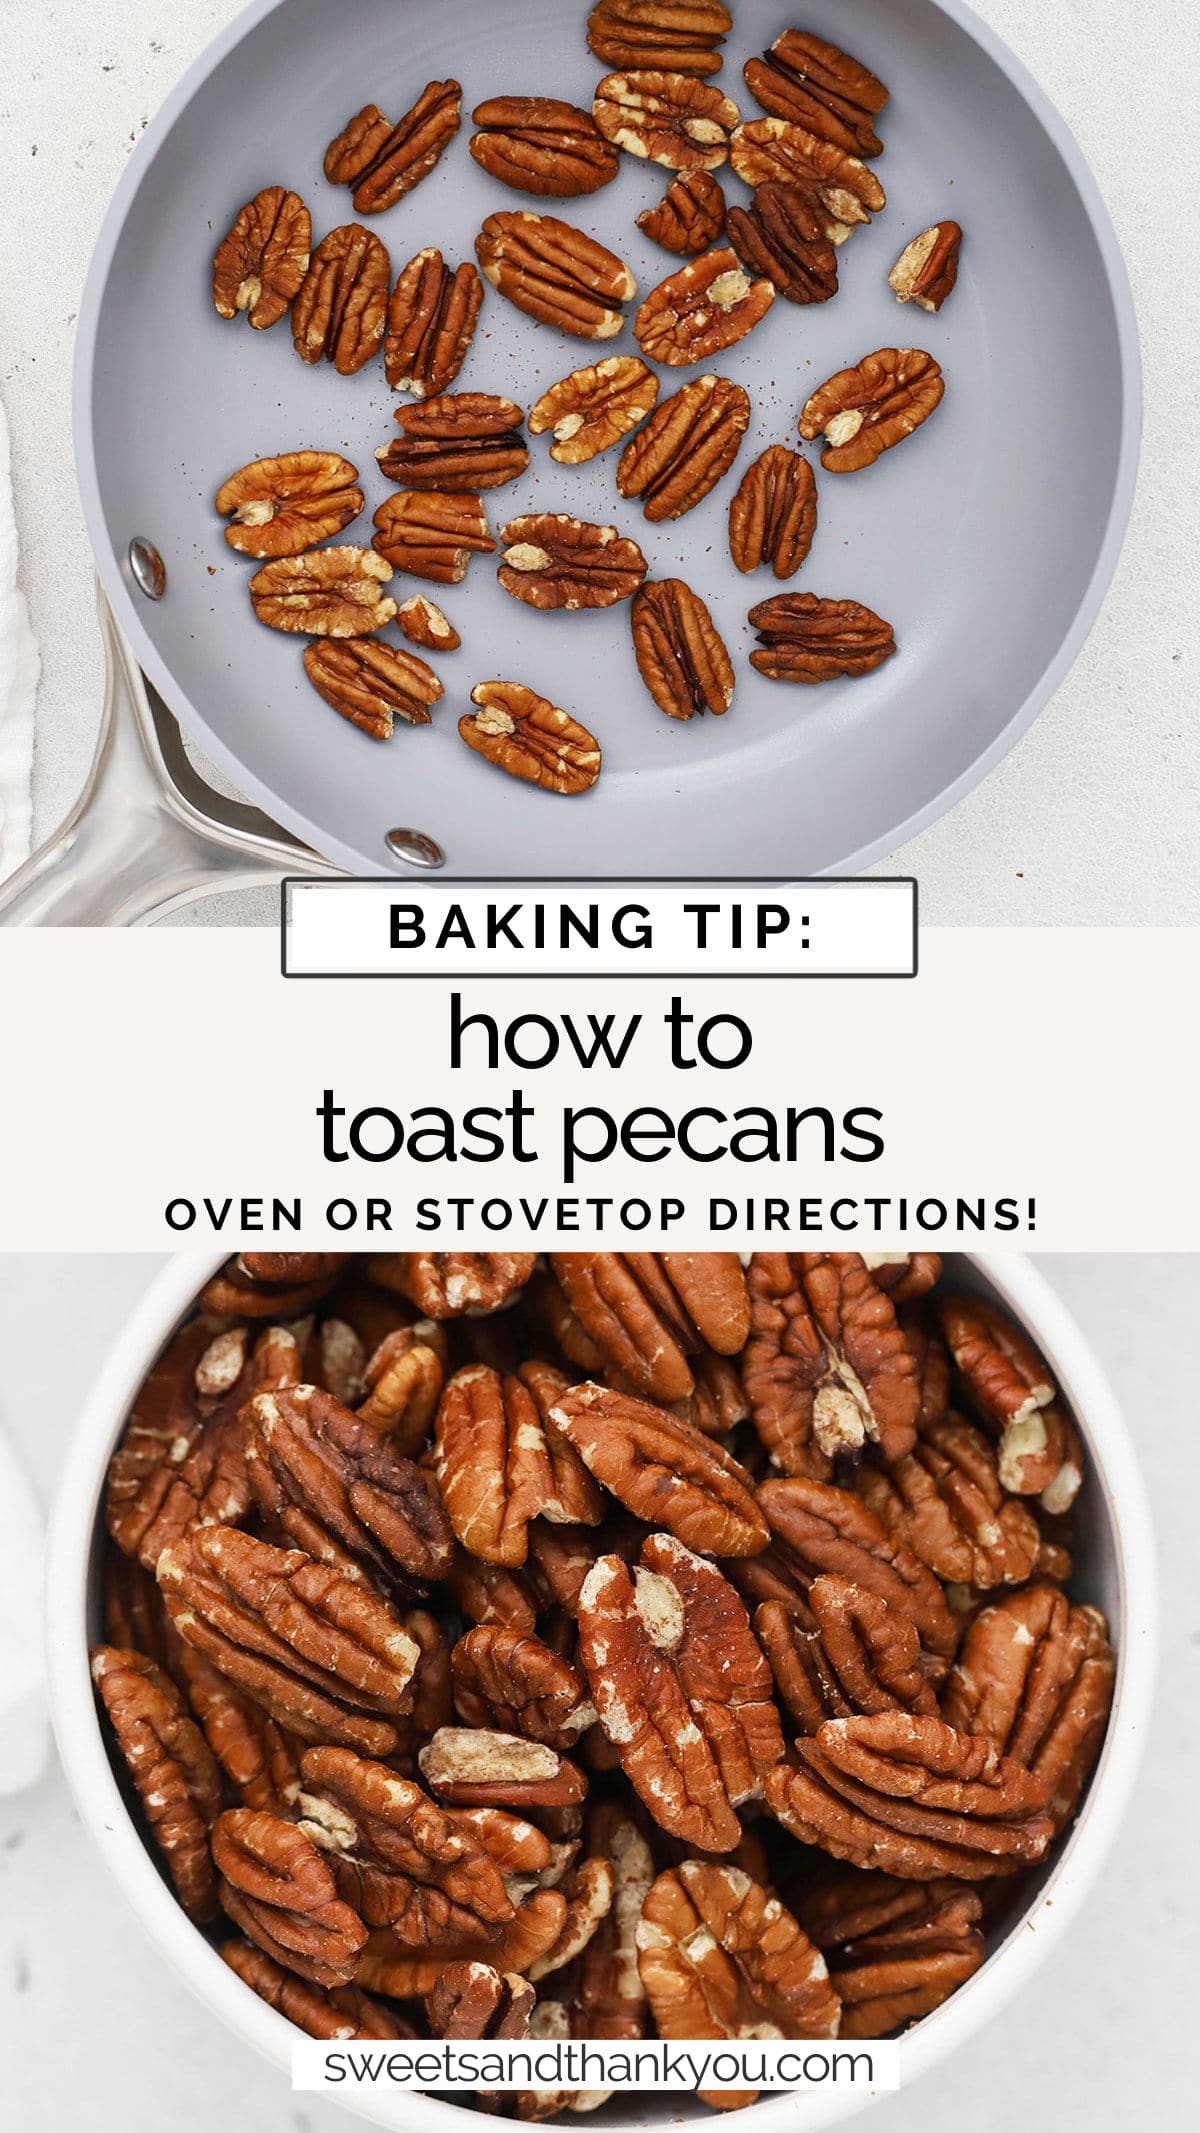 Wondering how to toast pecans? We'll walk you through 2 ways! Learn how to toast pecans in the oven or on the stovetop in this easy tutorial. / how to toast pecans oven directions / how to toast pecans on the stove / how to roast pecans / how long to toast pecans / how to toast pecans in a pan / how to make toasted pecans / baking tips / 